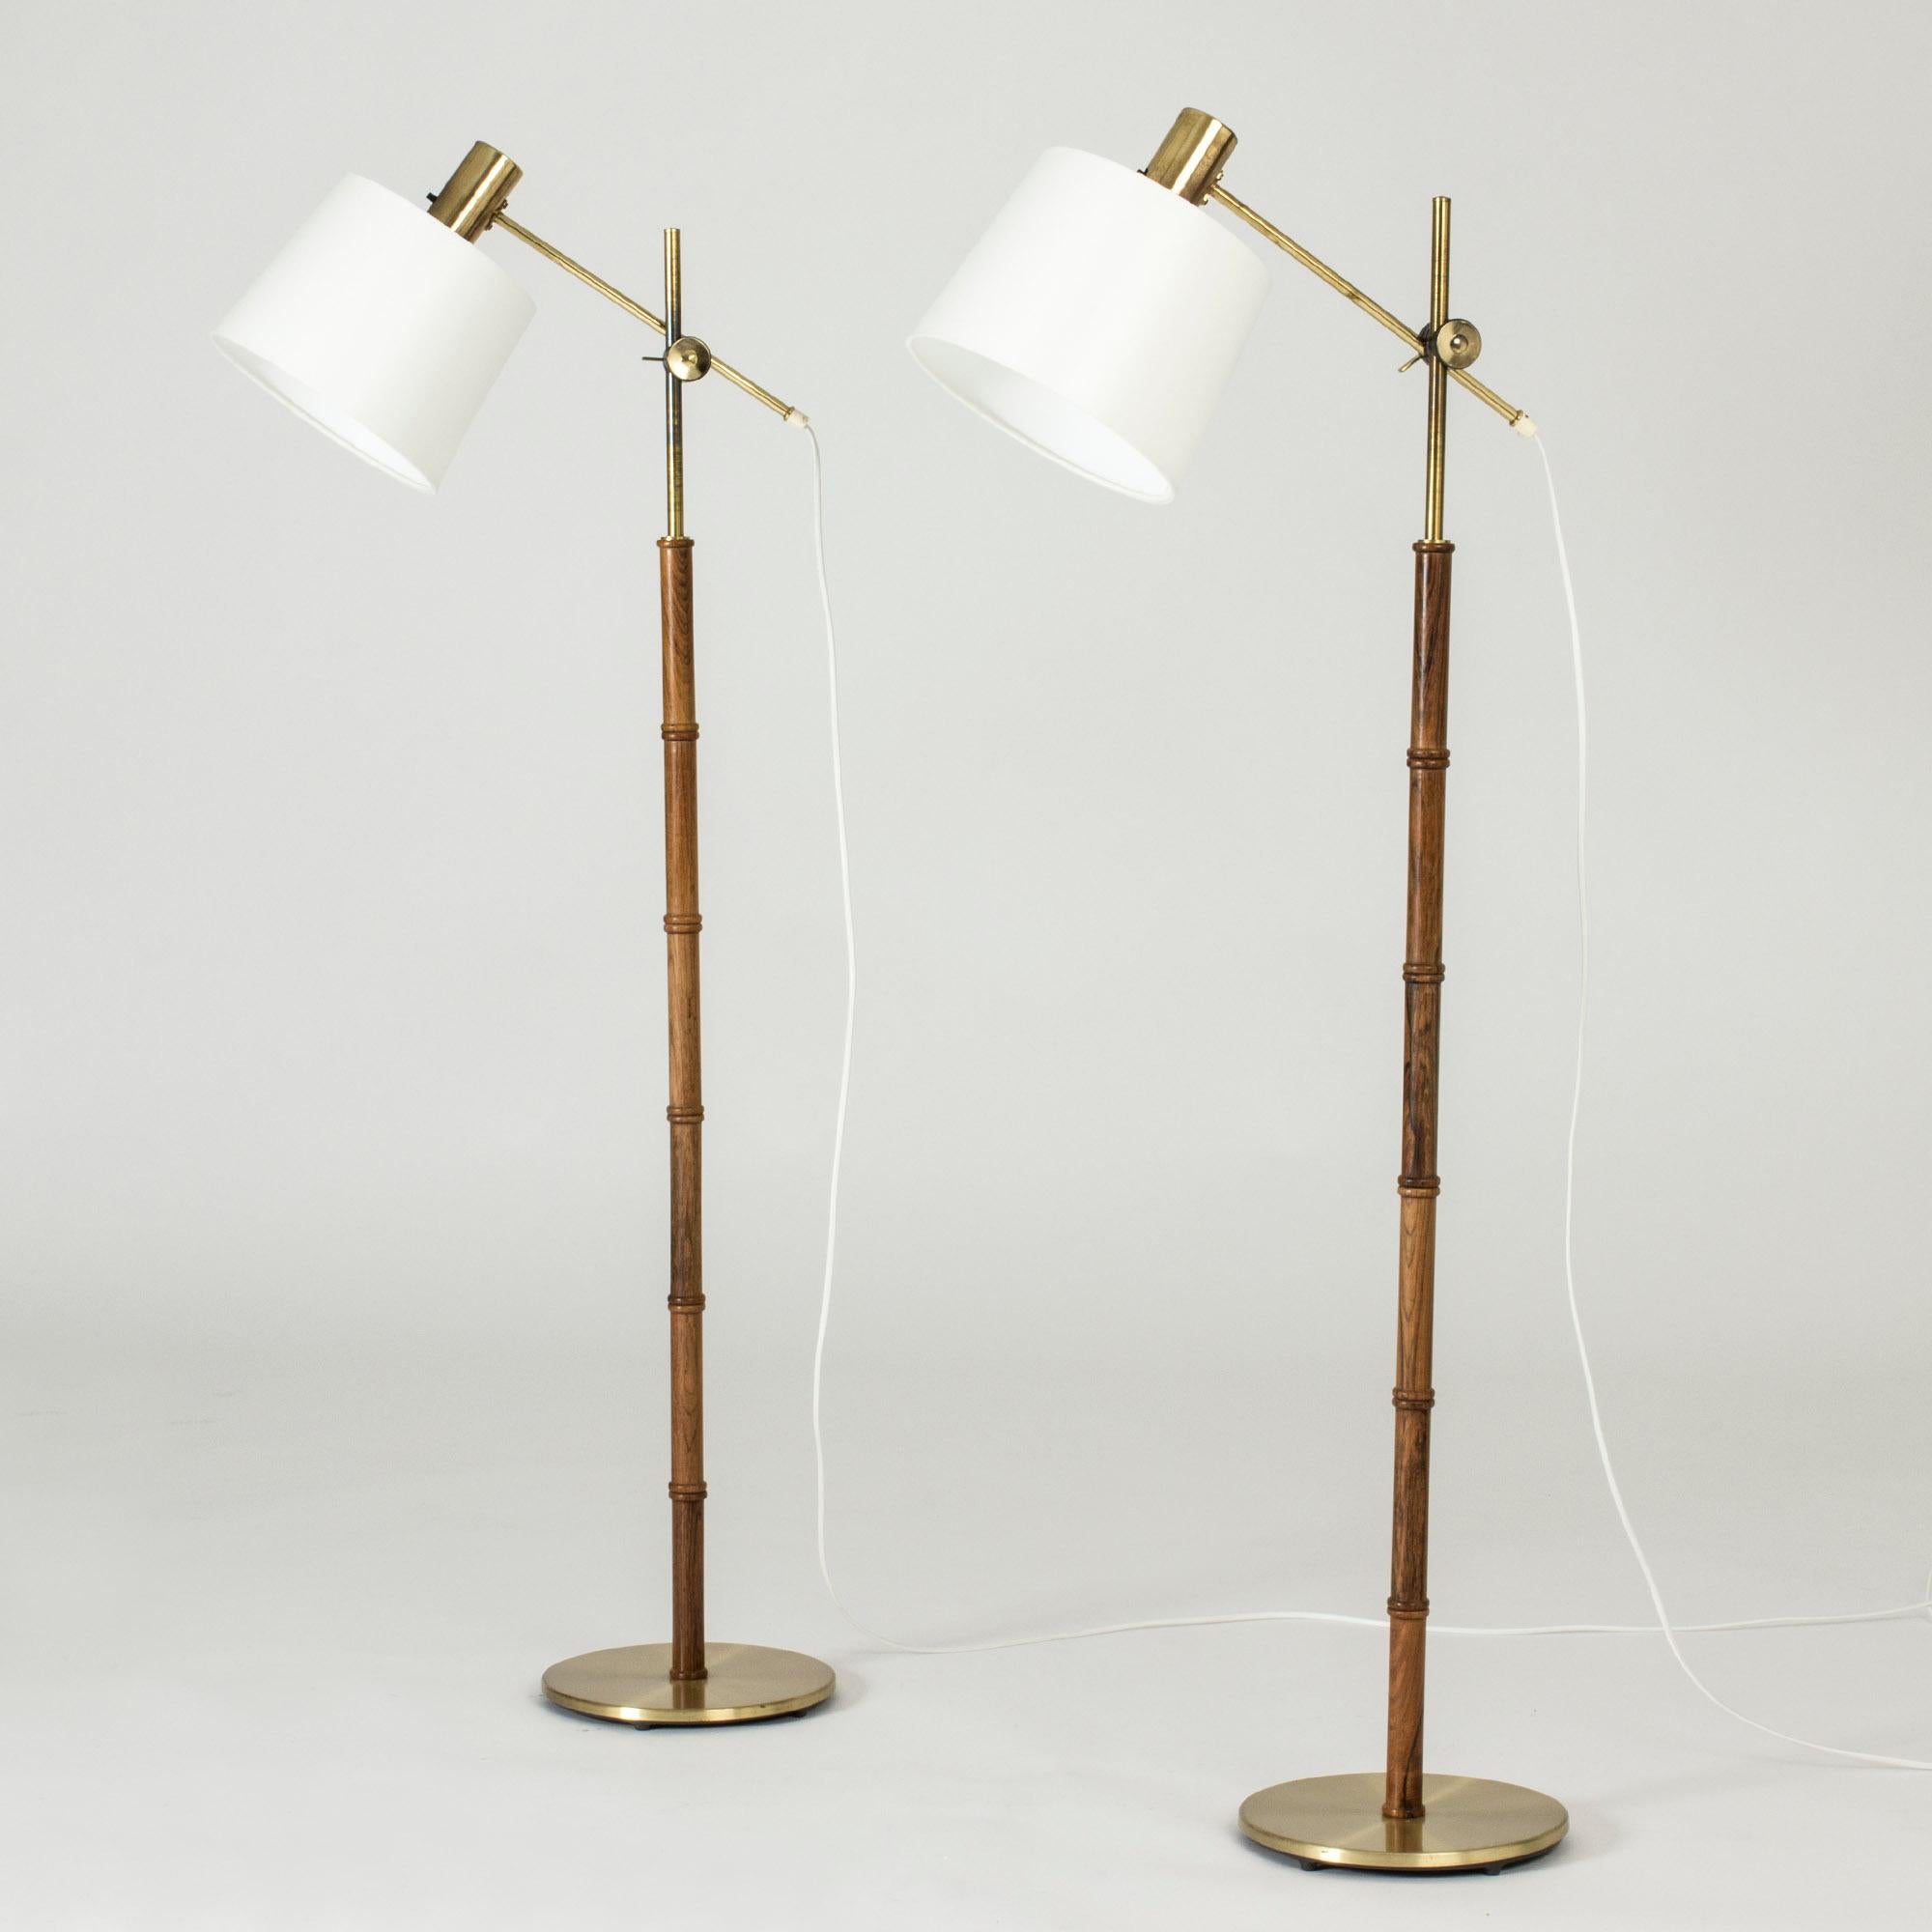 Pair of cool floor lamps from Falkenbergs Belysning, made from brass and wood sculpted in a bamboo stem design. Shades adjustable in height and angles.